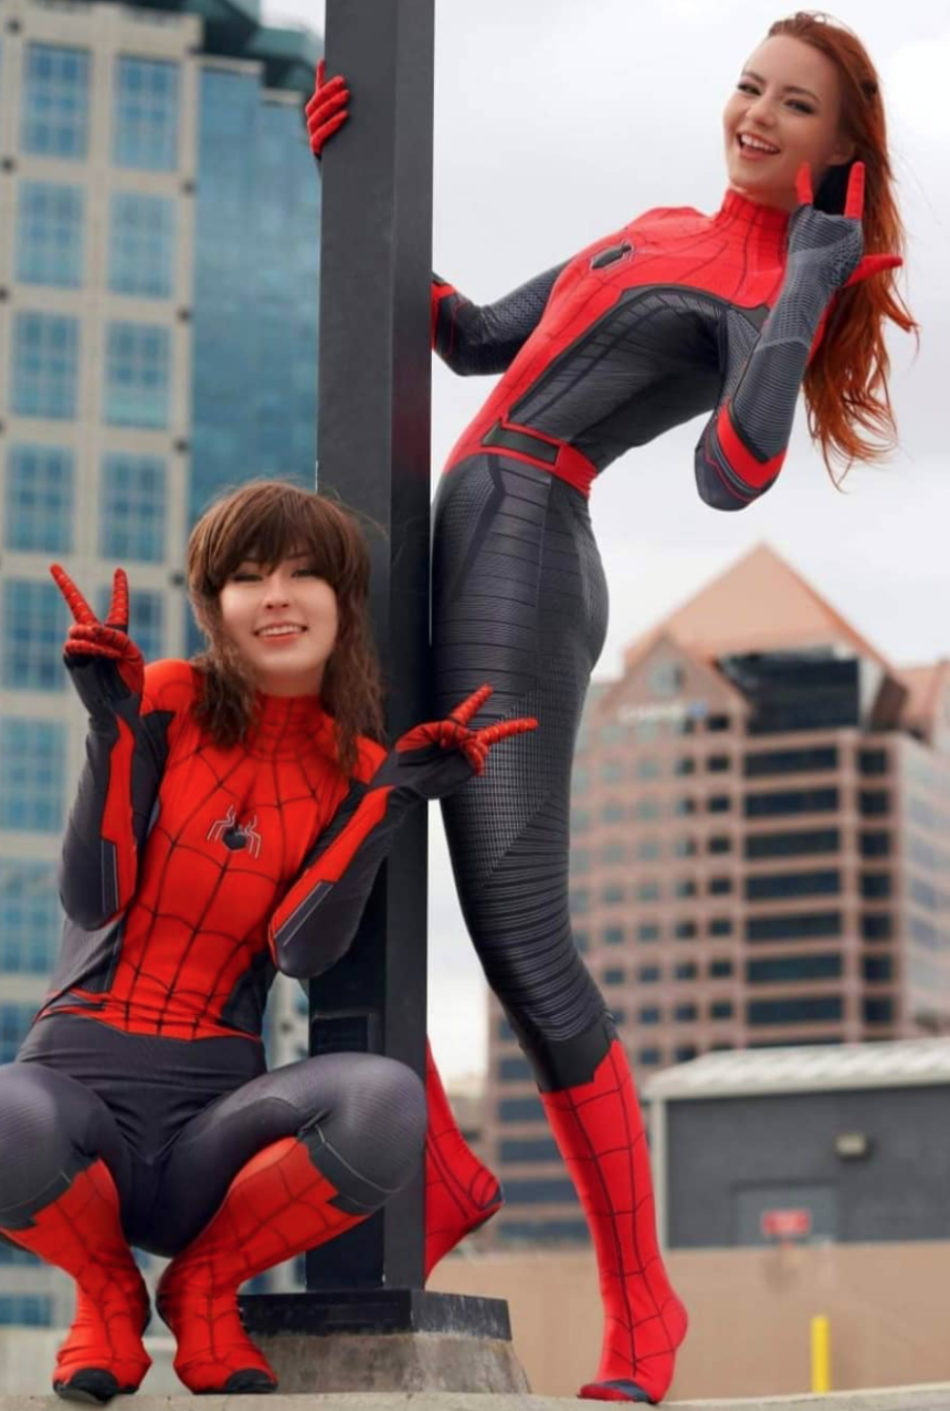 Sexy Red Hot Cosplay Girls Spiderman Women Best Photo Compilation 2021 (89 HQ Photos) 33